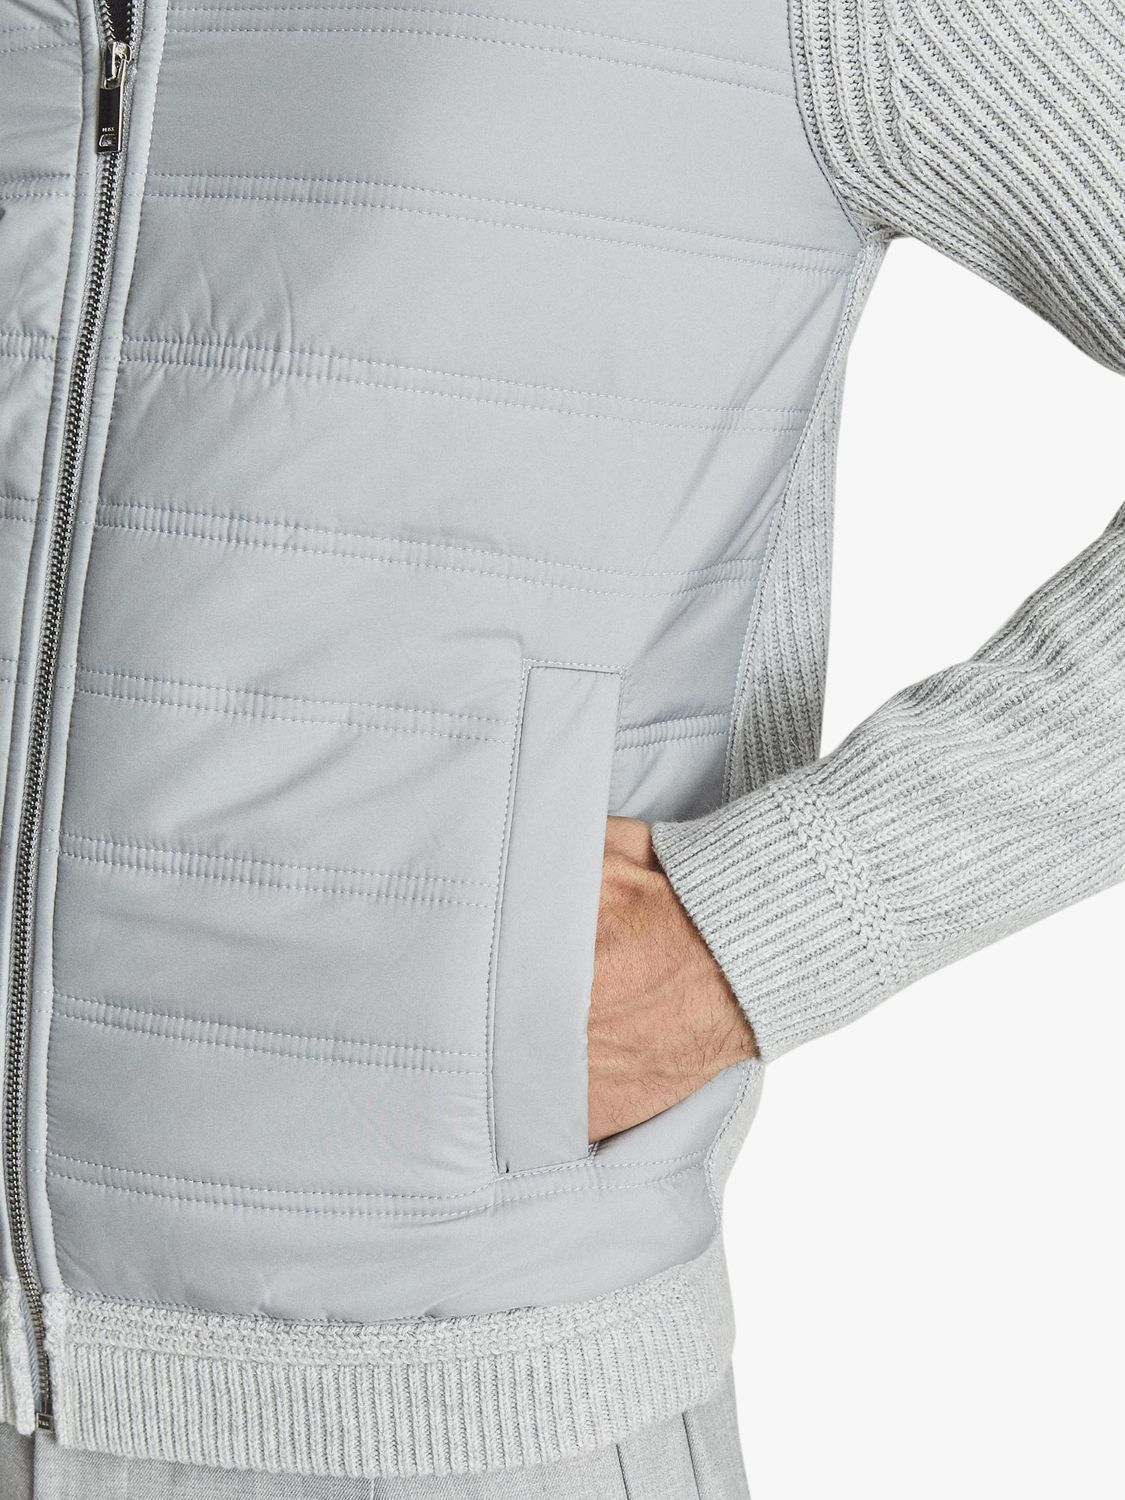 Reiss Trainer Jacket, Soft Grey at John Lewis & Partners